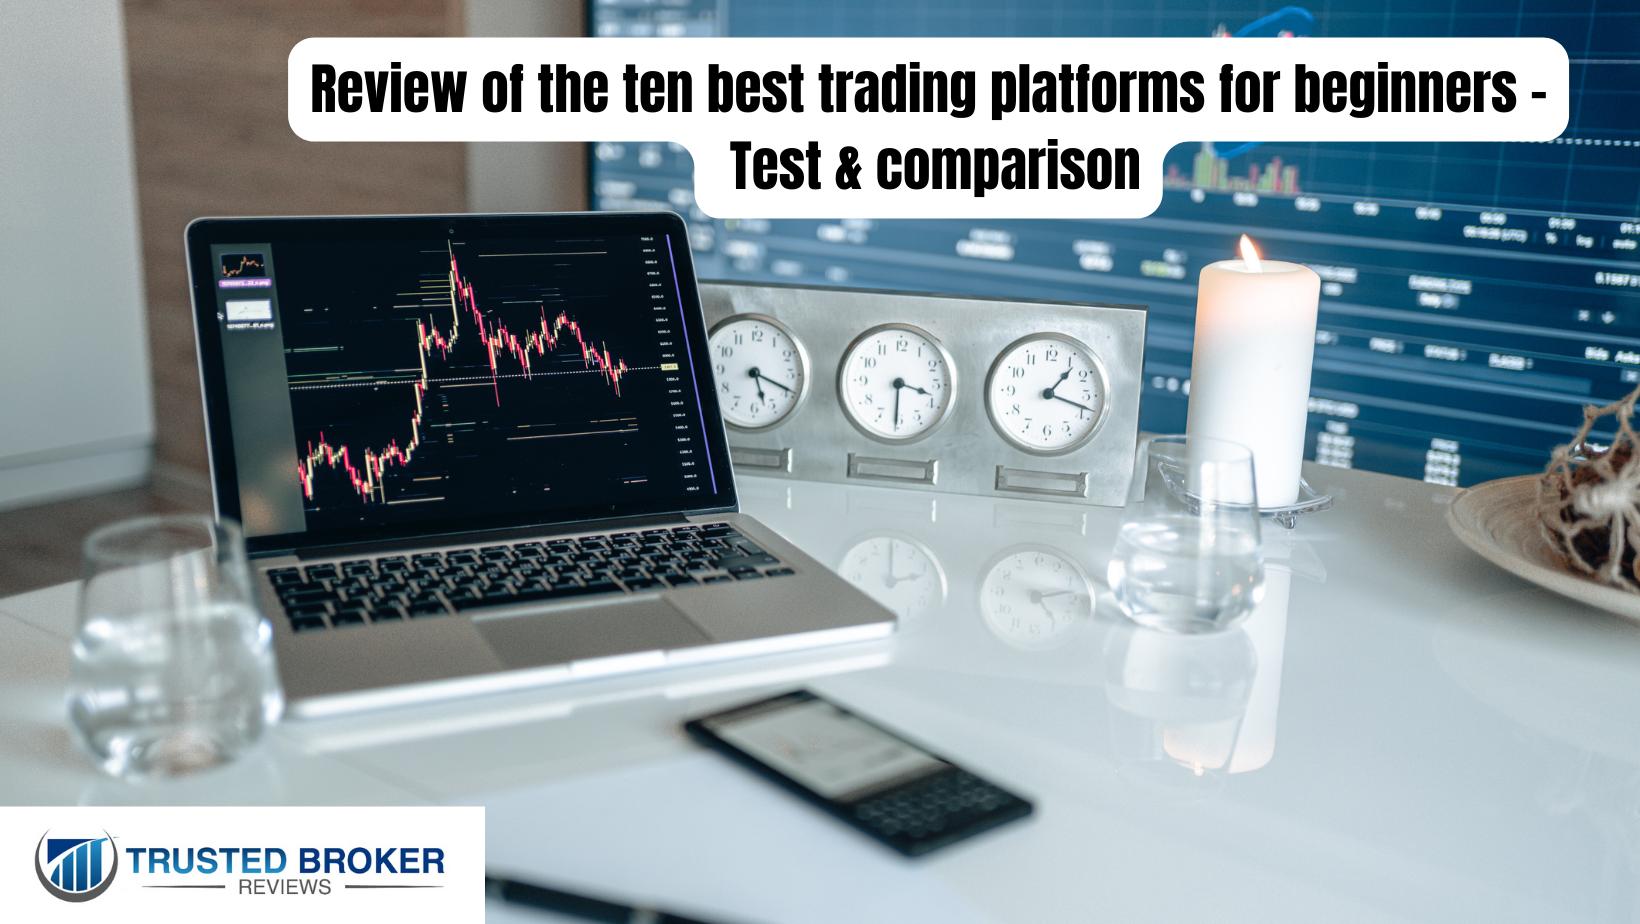 Review of the 10 best trading platforms for beginners - test & comparison